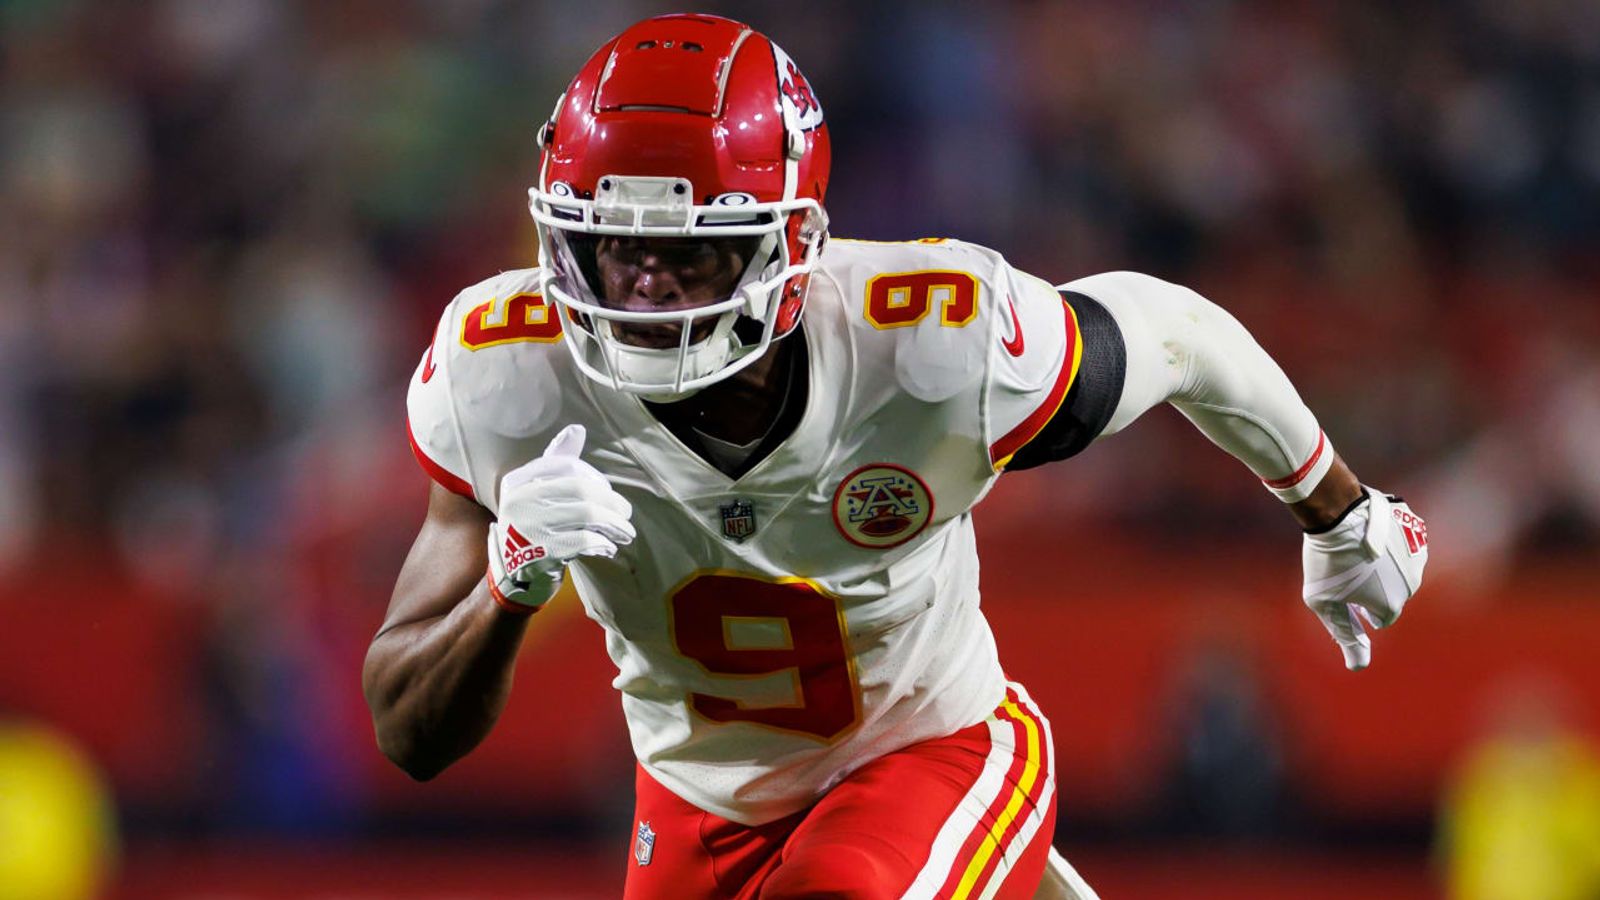 Chiefs WR Juju Smith-Schuster expresses desire to stay in KC